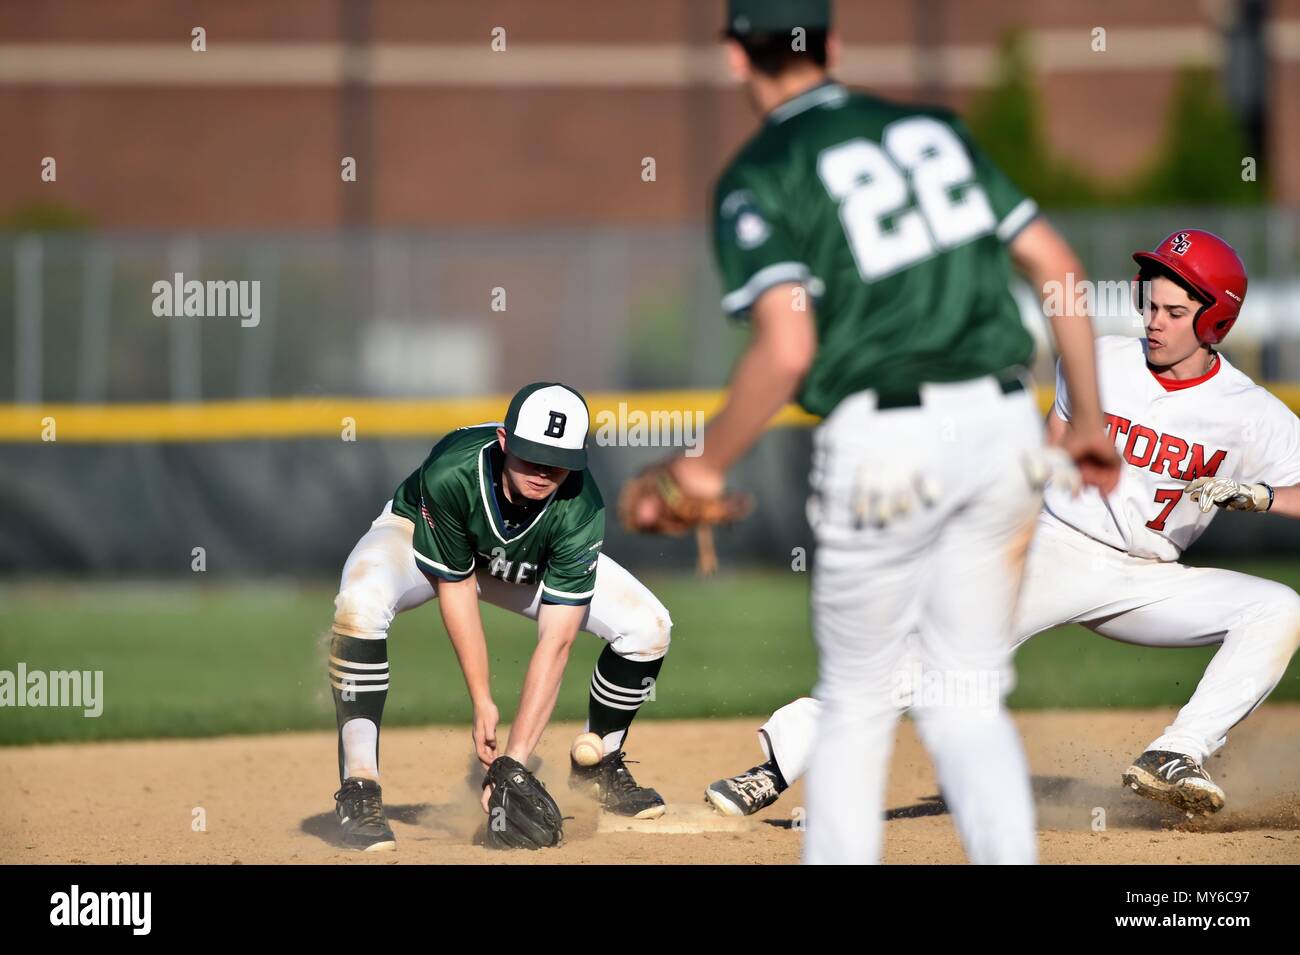 Second baseman fielding a low throw at second base allowing the runner to arrive safely at the bag standing up. USA. Stock Photo